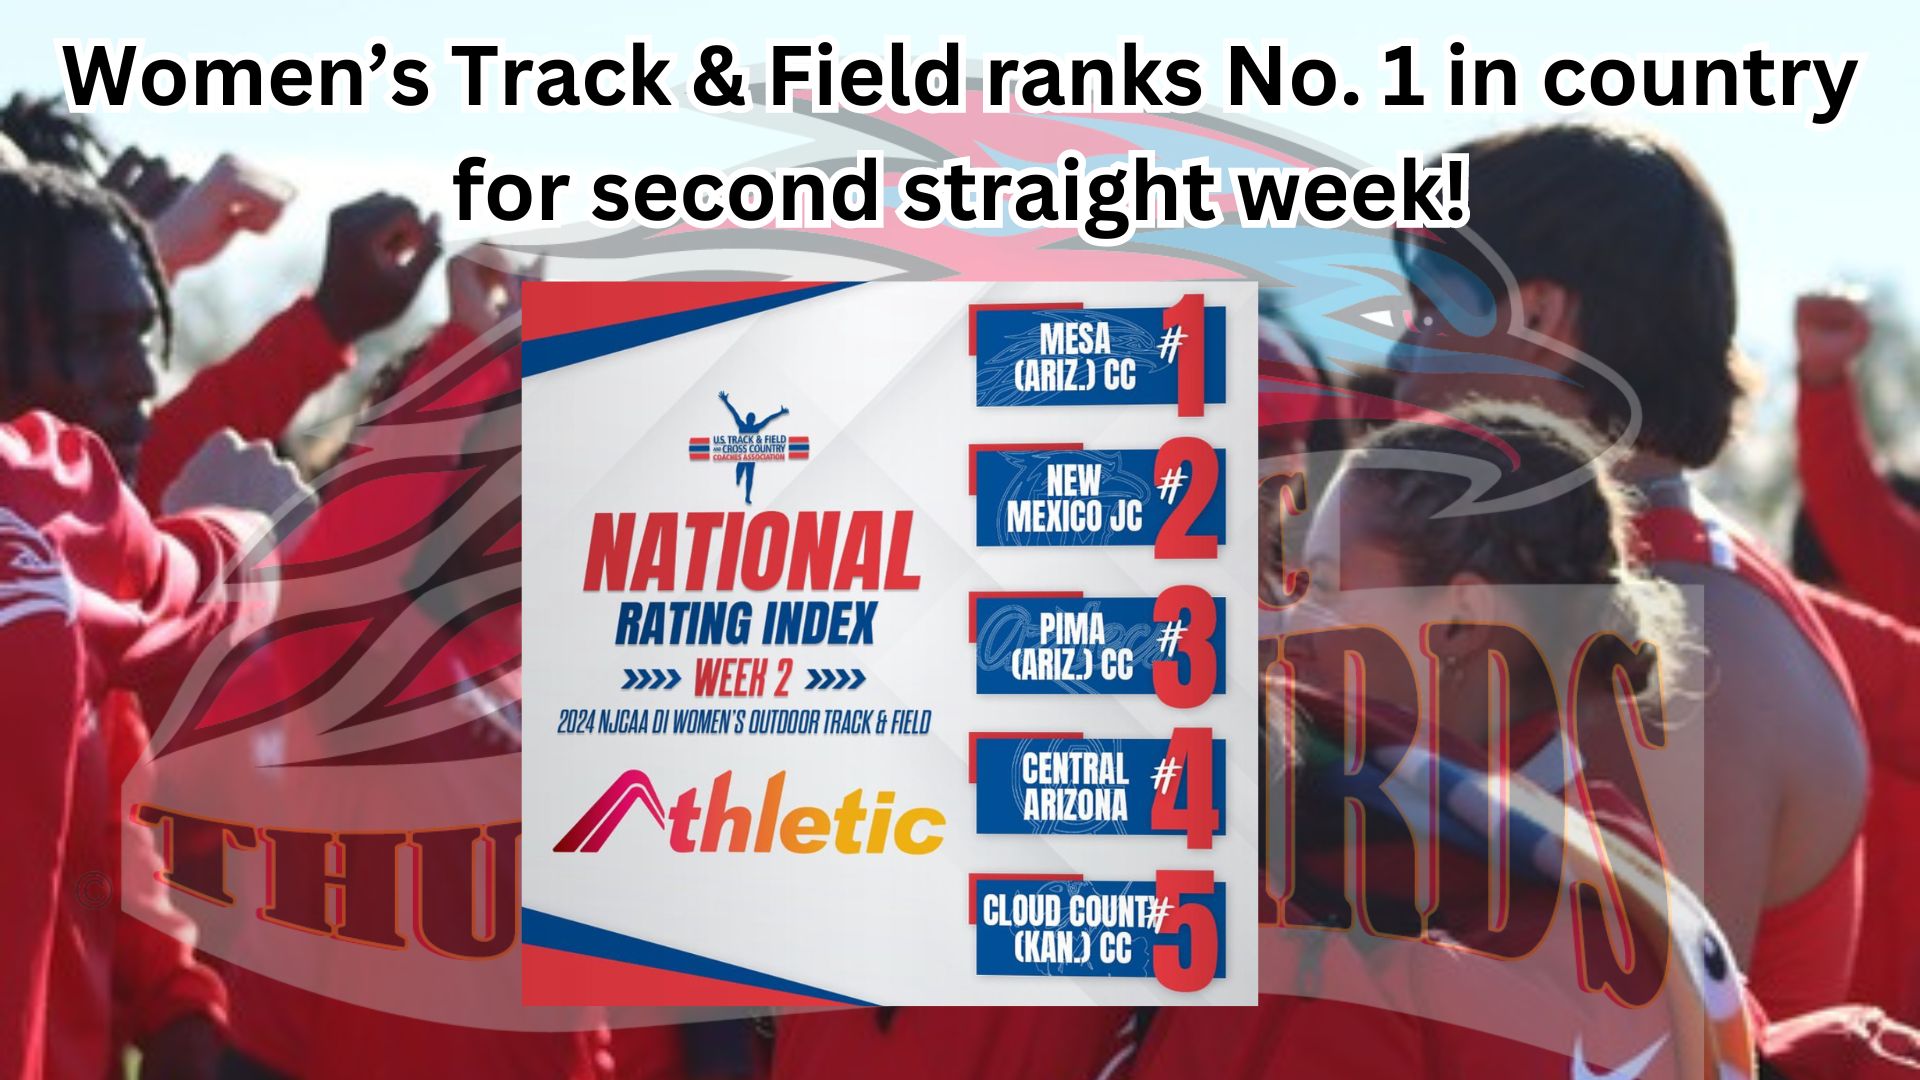 Women's Track & Field sits atop National Rating Index for second straight week.